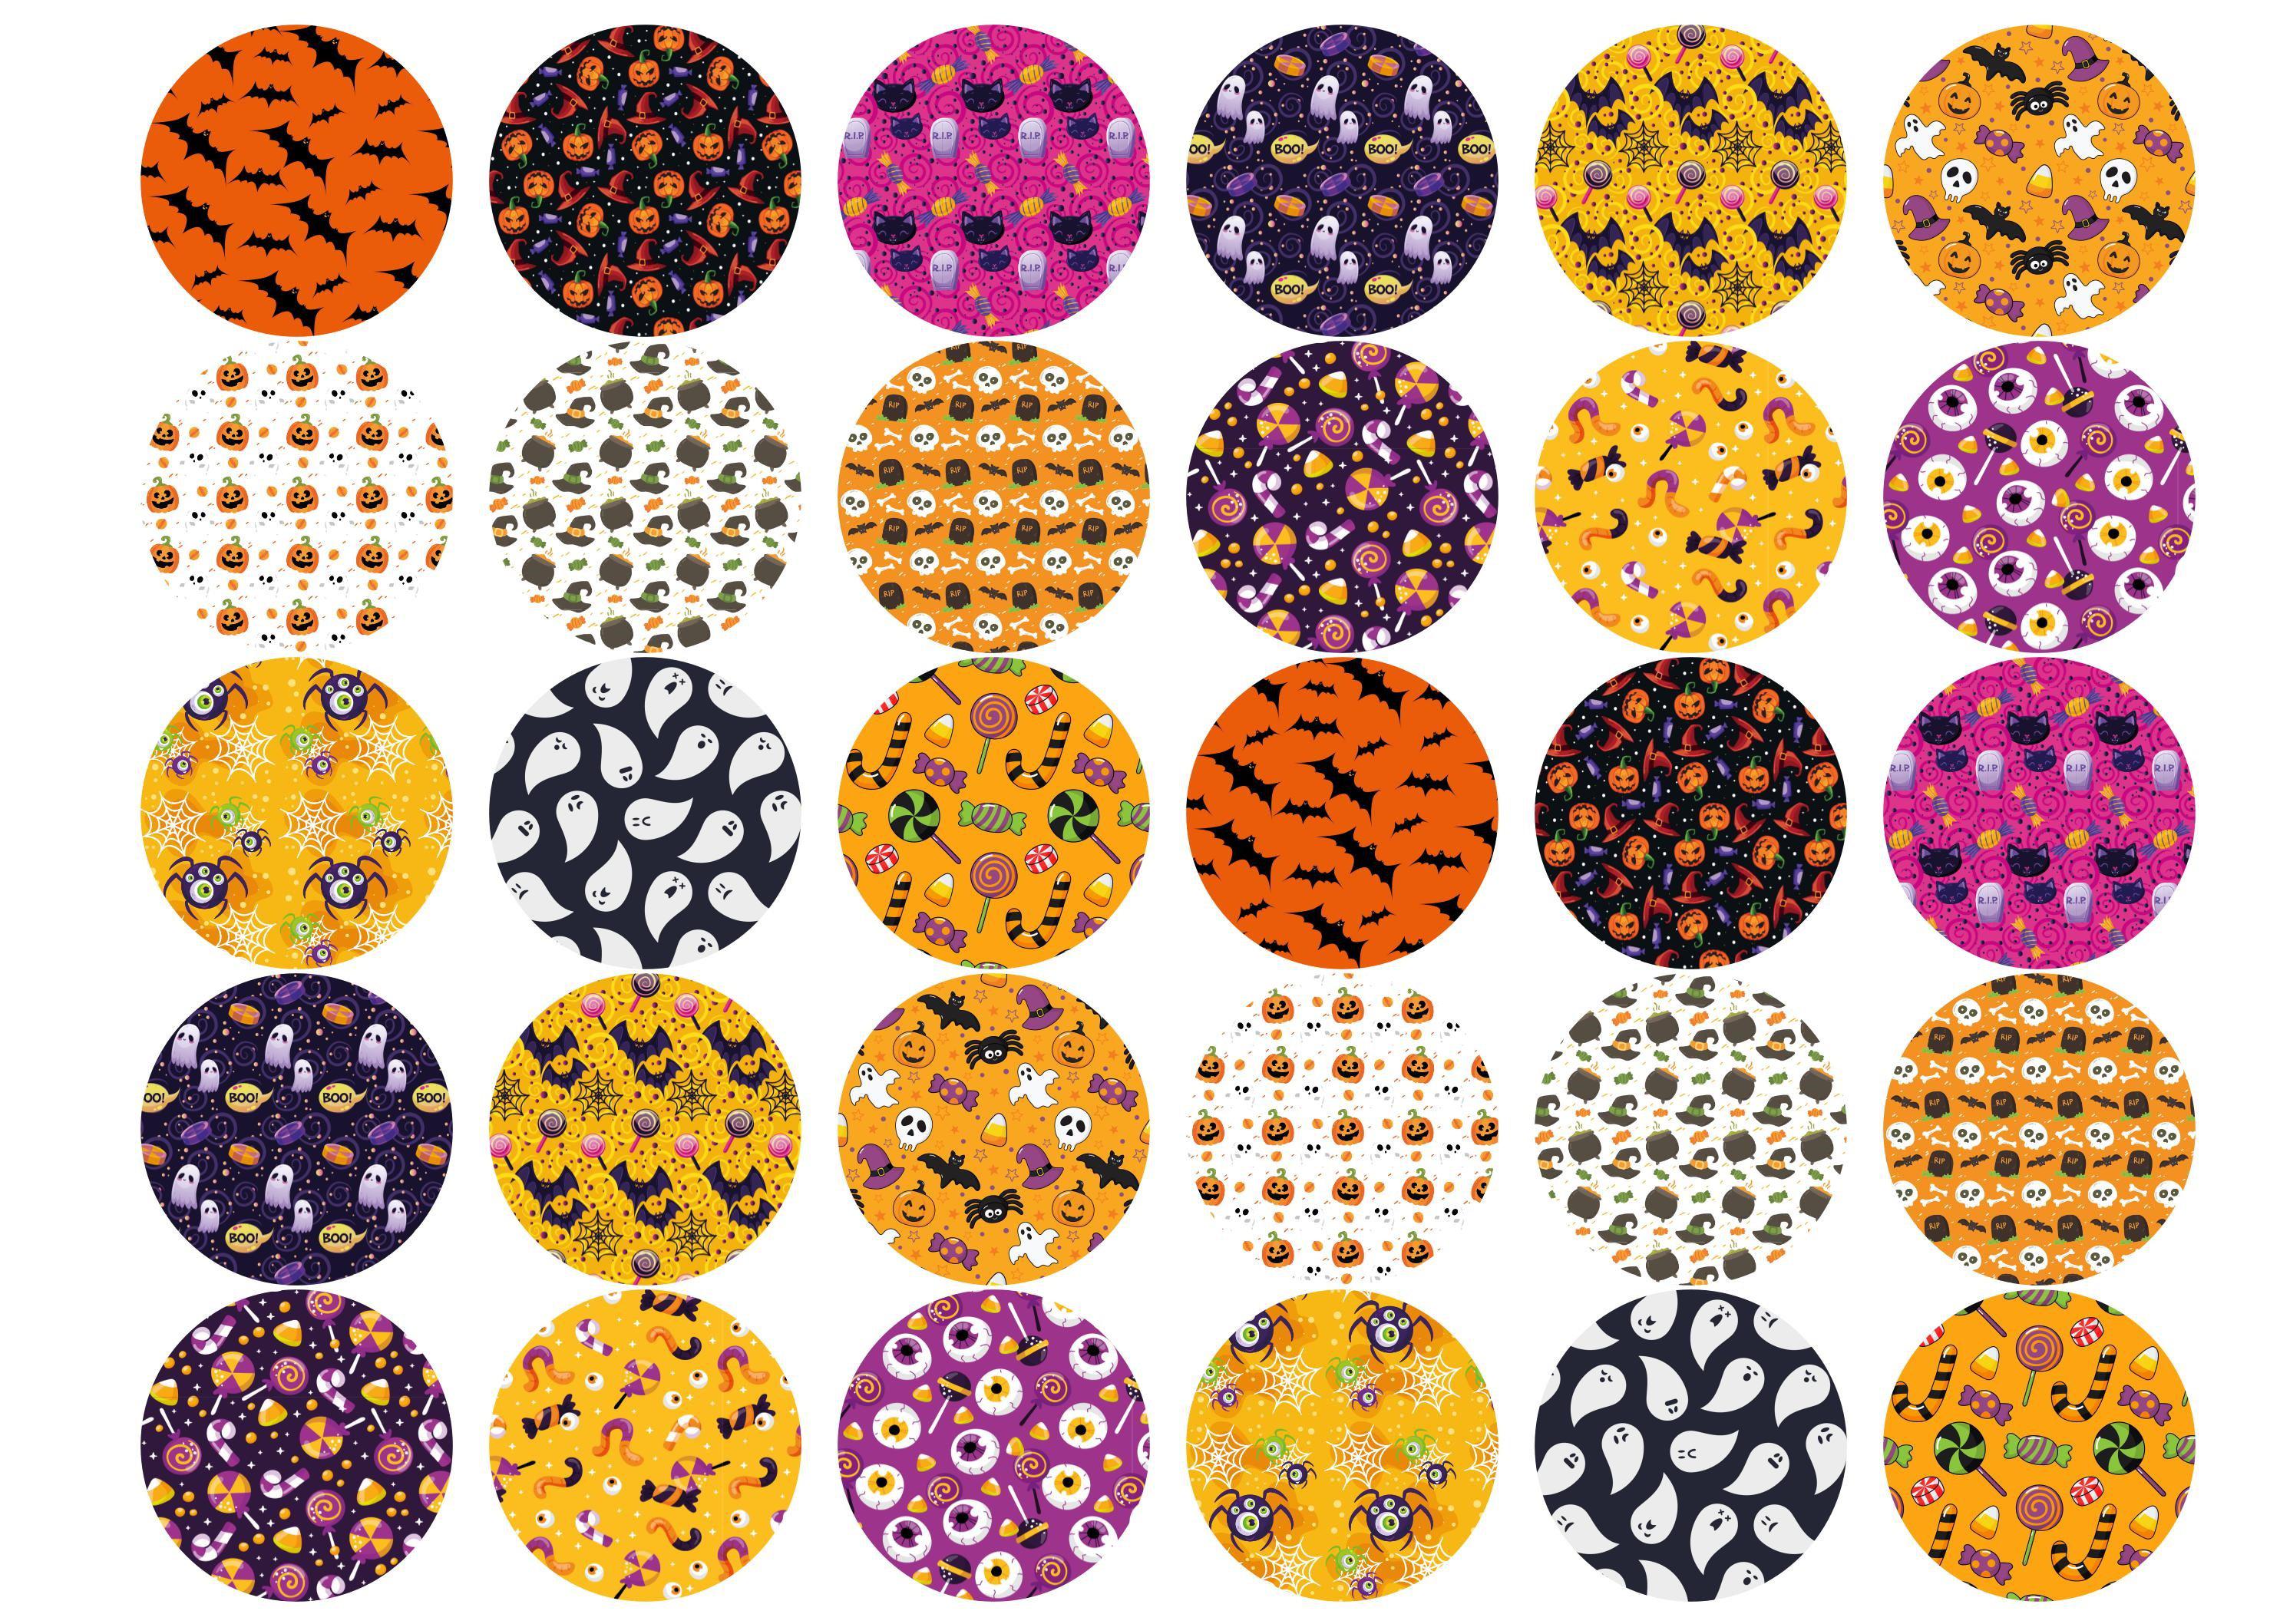 30 printed cupcake toppers with Halloween patterns